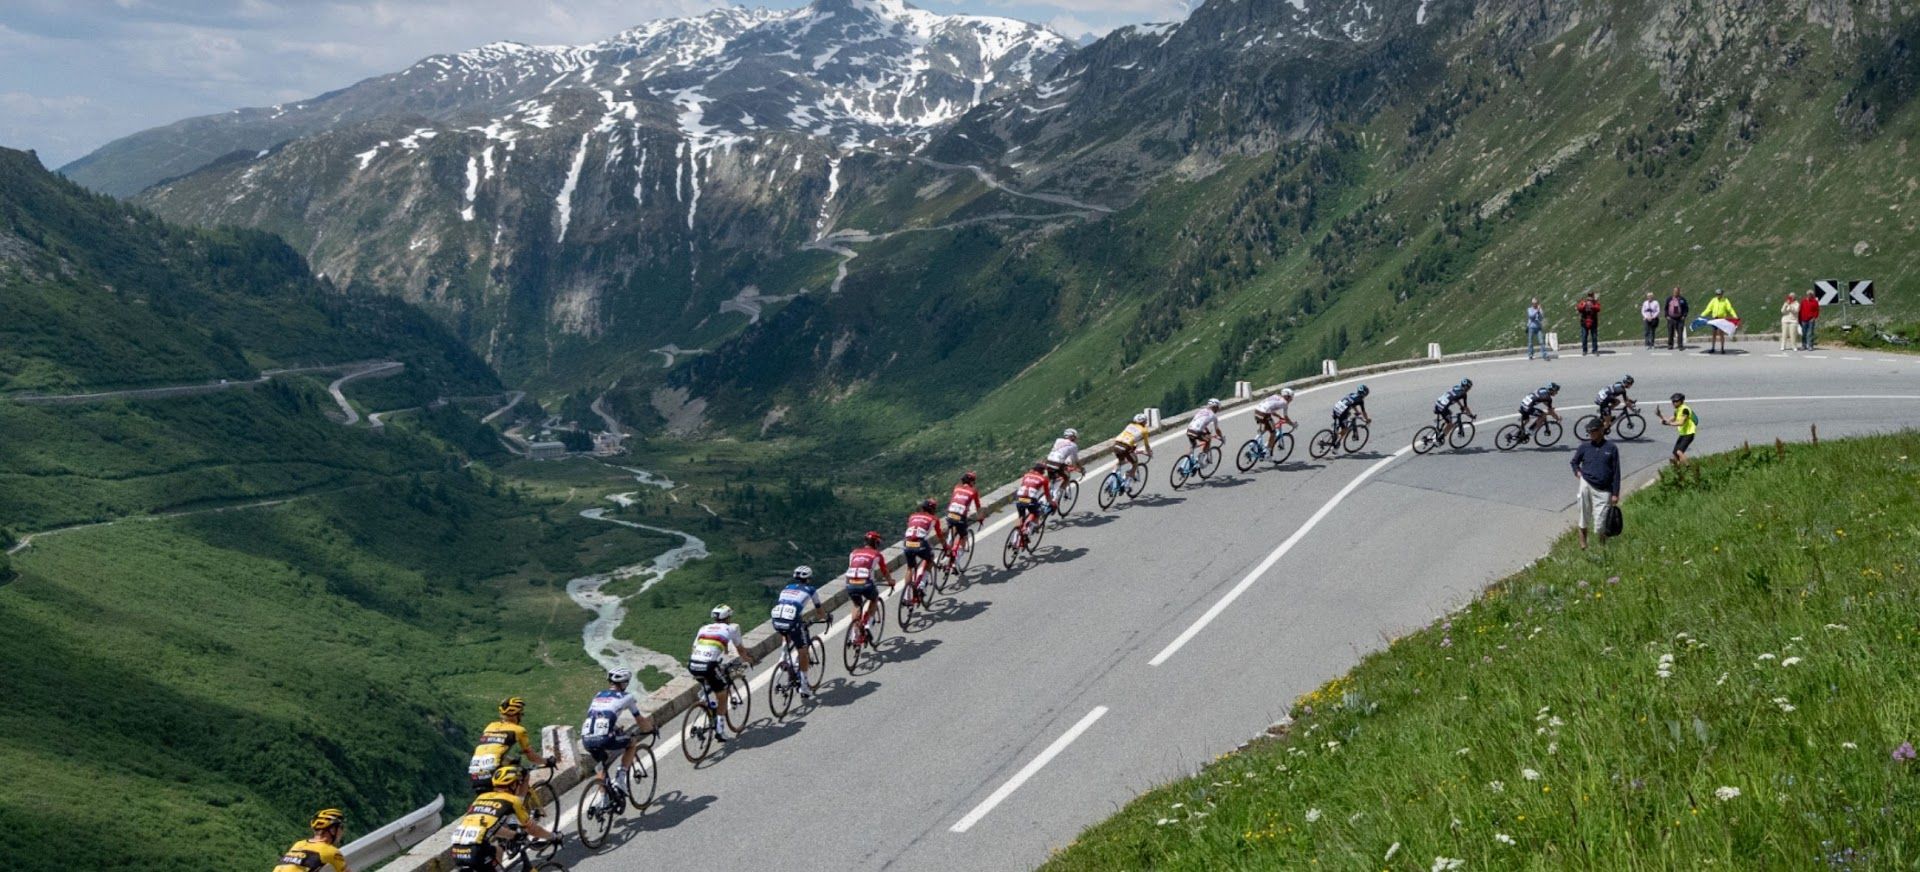 Tour de Suisse - a brutal eight-day Pro WorldTour race and cycling festival